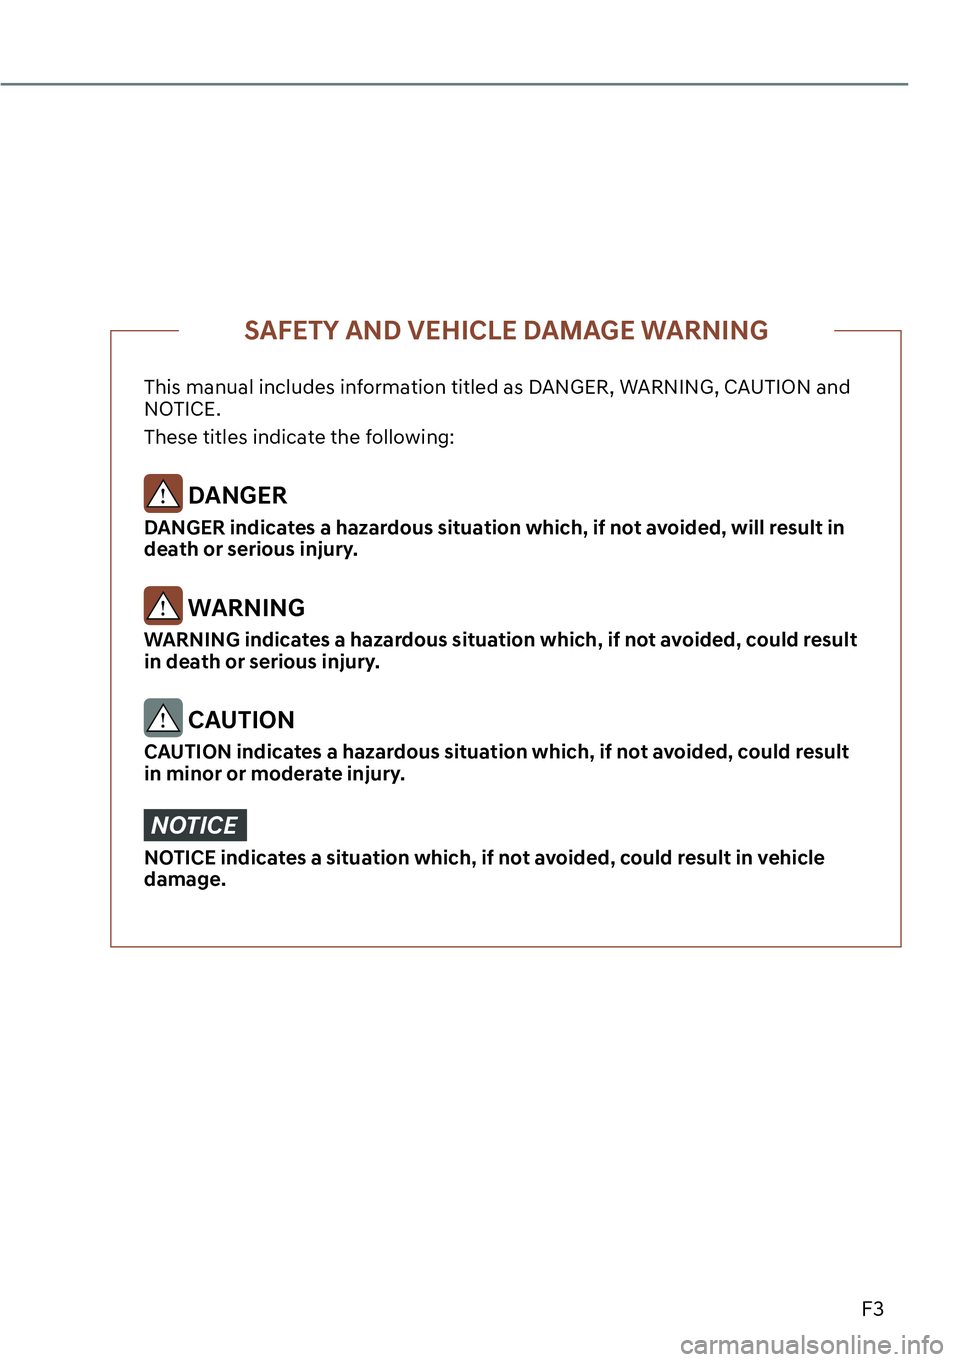 GENESIS G90 2023  Owners Manual F3
This manual includes information titled as DANGER, WARNING, CAUTION and 
NOTICE.
These titles indicate the following:
 DANGER
DANGER indicates a hazardous situation which, if not avoided, will resu